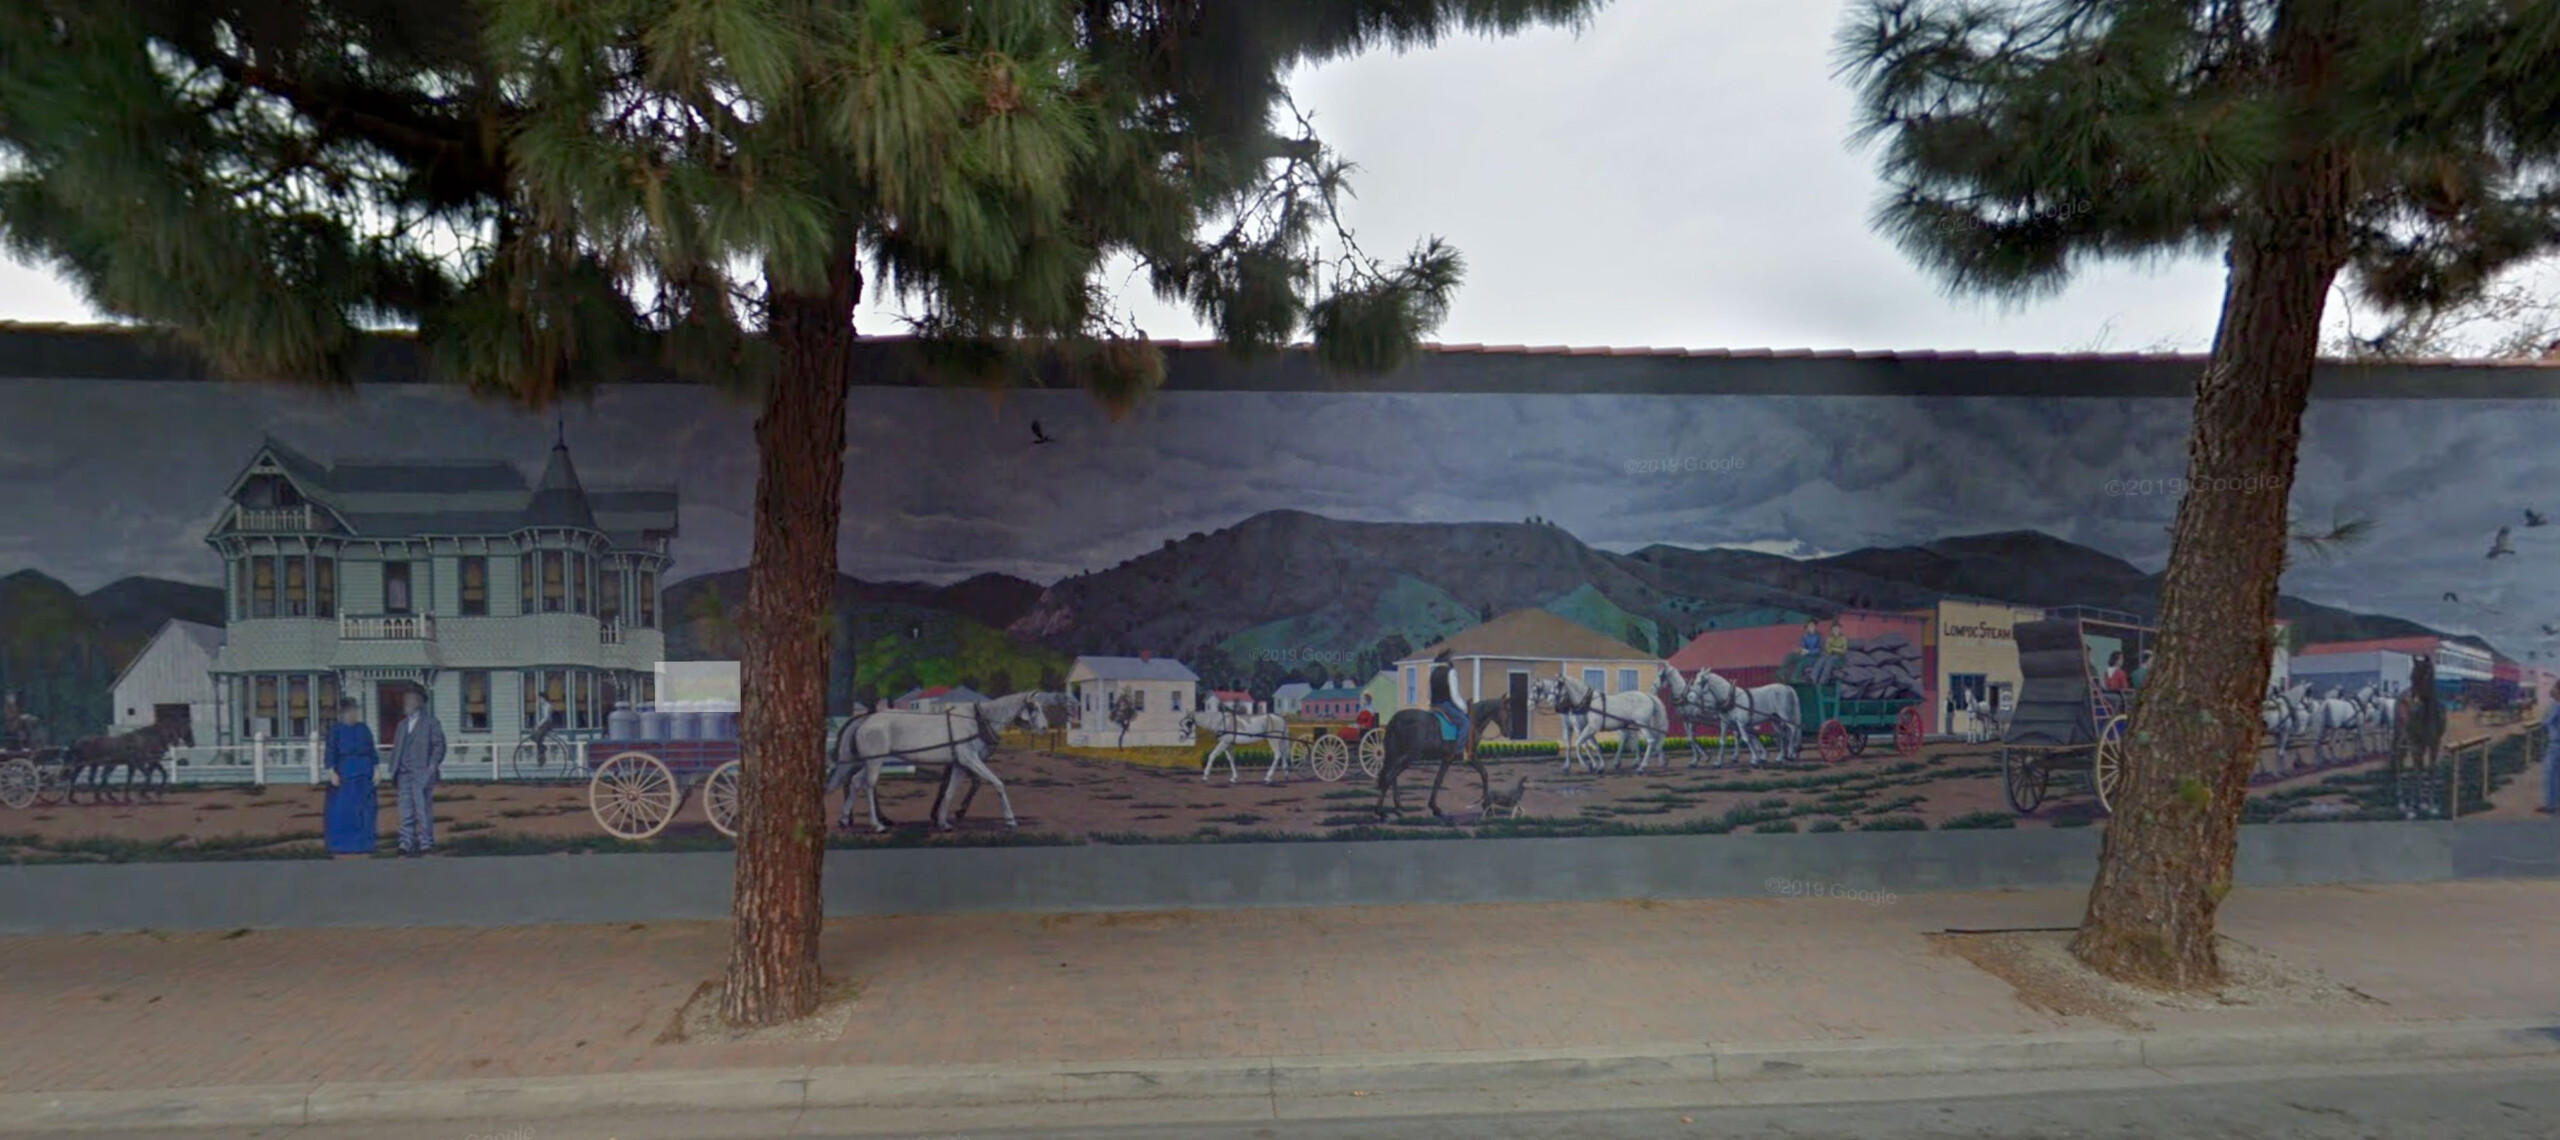 Lompoc Mural - Rudolph Mansion (1999) - Located at 137 South H Street